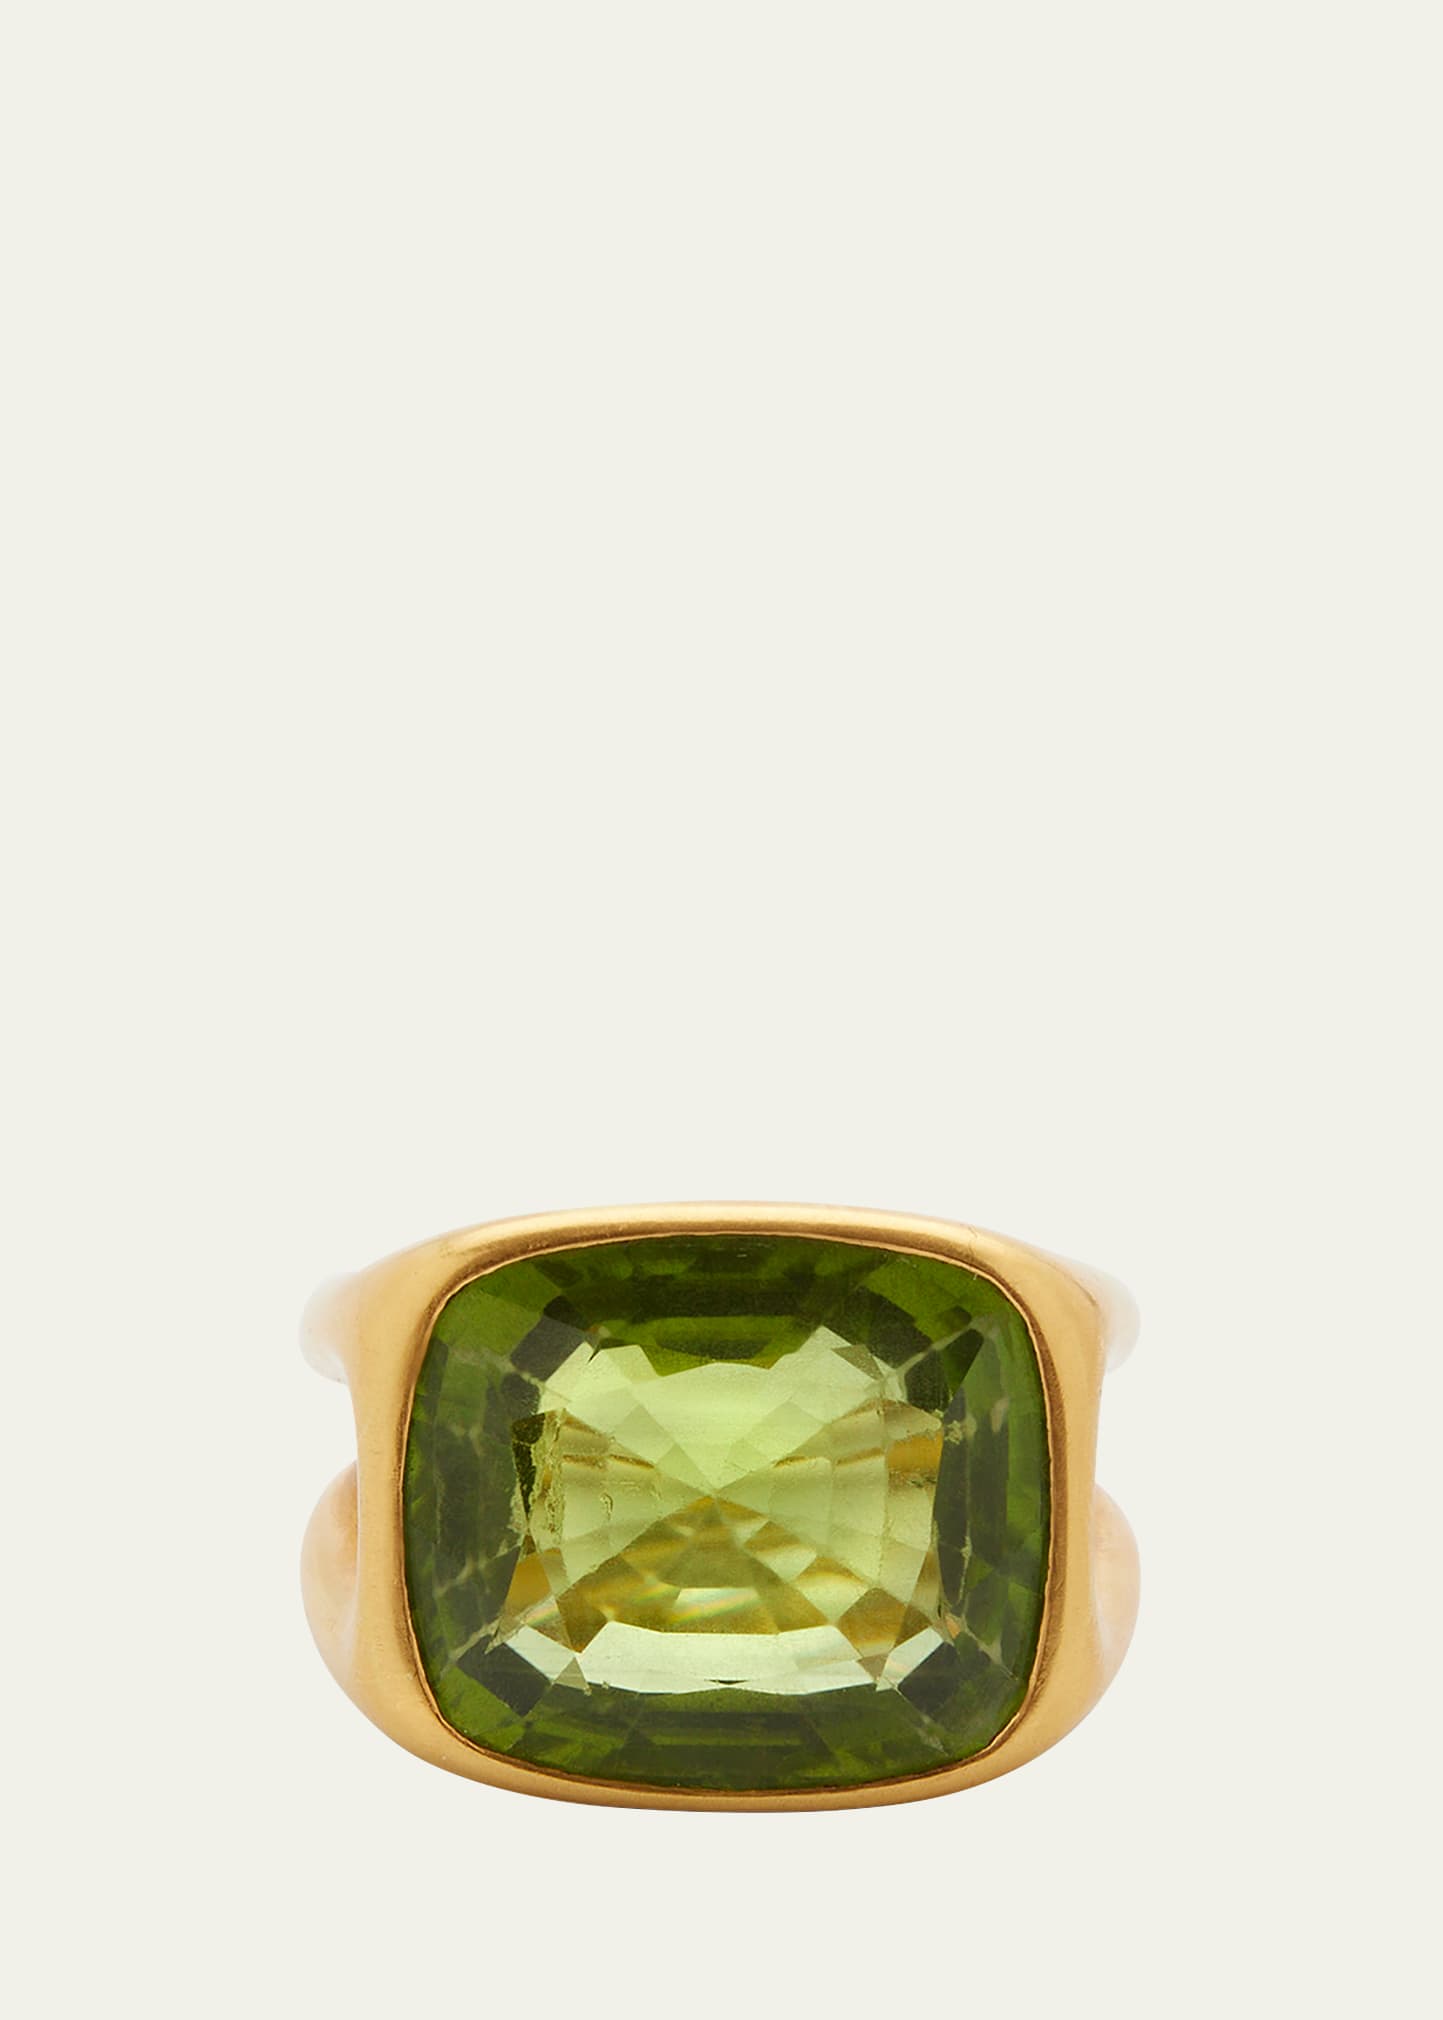 22K Gold Ring with Peridot, Size 7